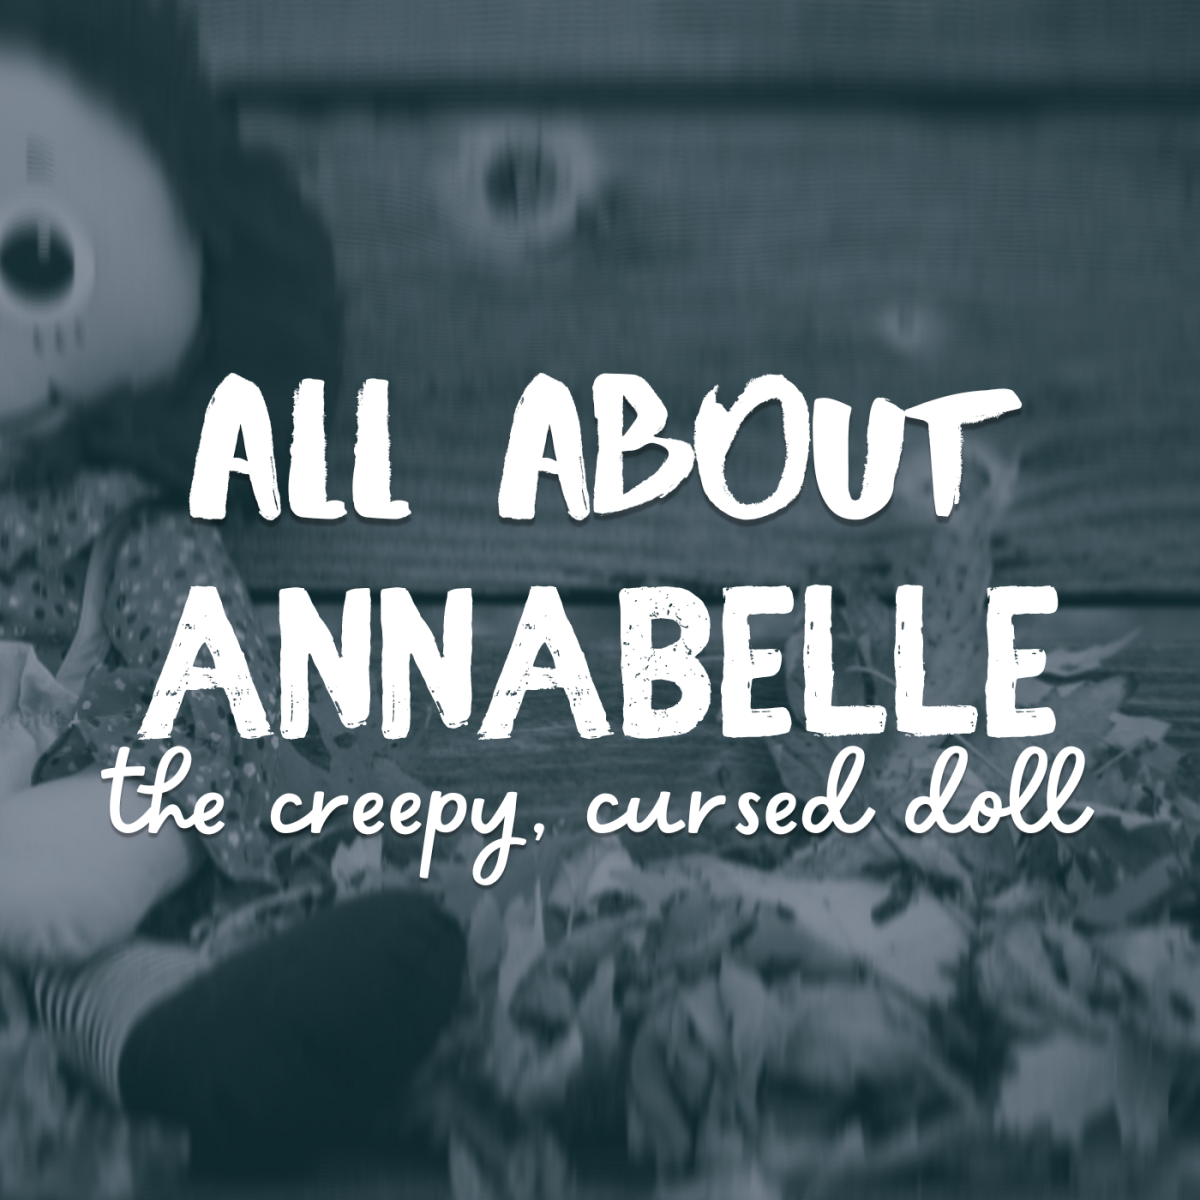 Have you heard the story of Annabelle, the cursed doll? Read more to learn all about her.